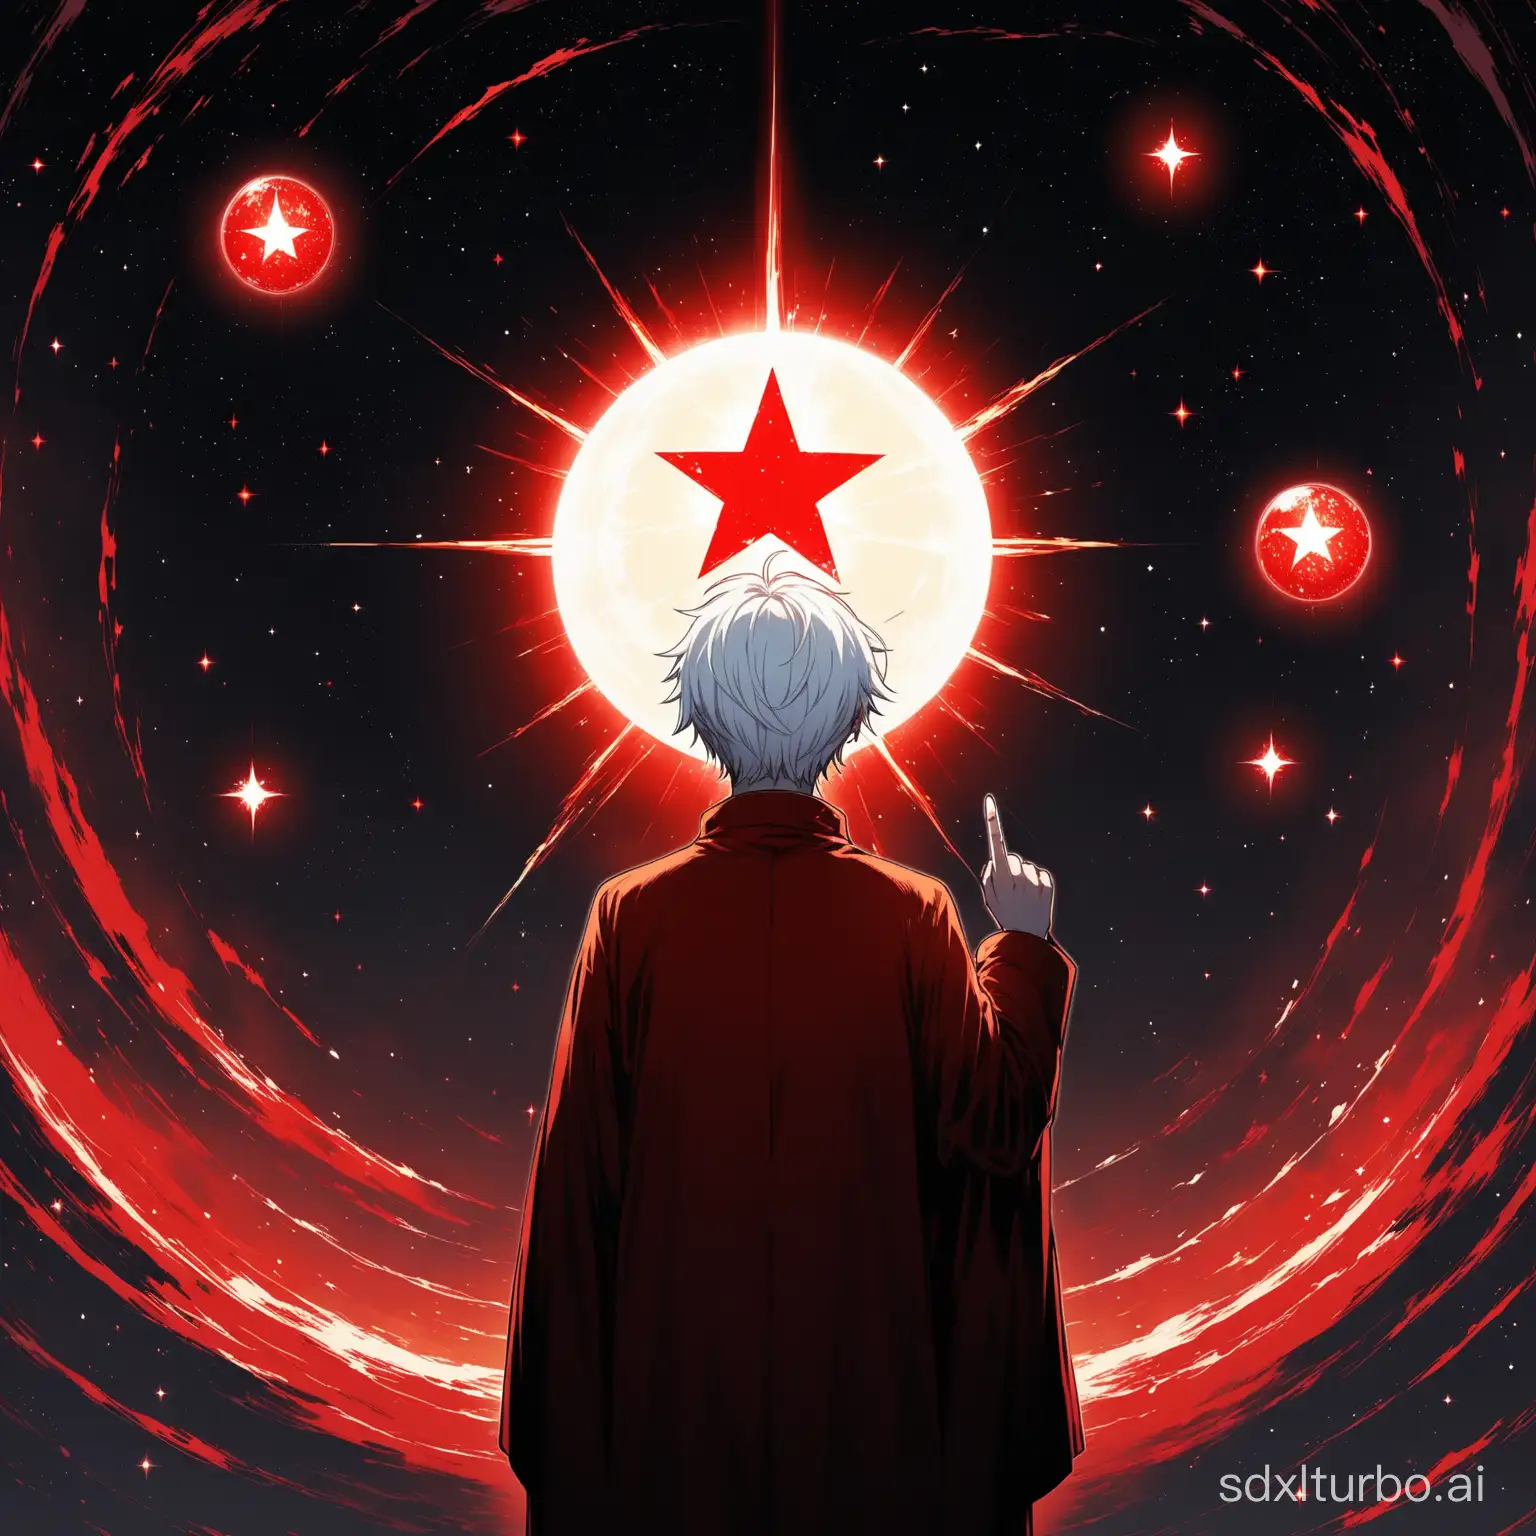 Loneliness brought by absolute power, surrounded by darkness. On the tip of the index finger of the twenty-four-year-old boy with white hair, there was a bright energy ball like a red star.